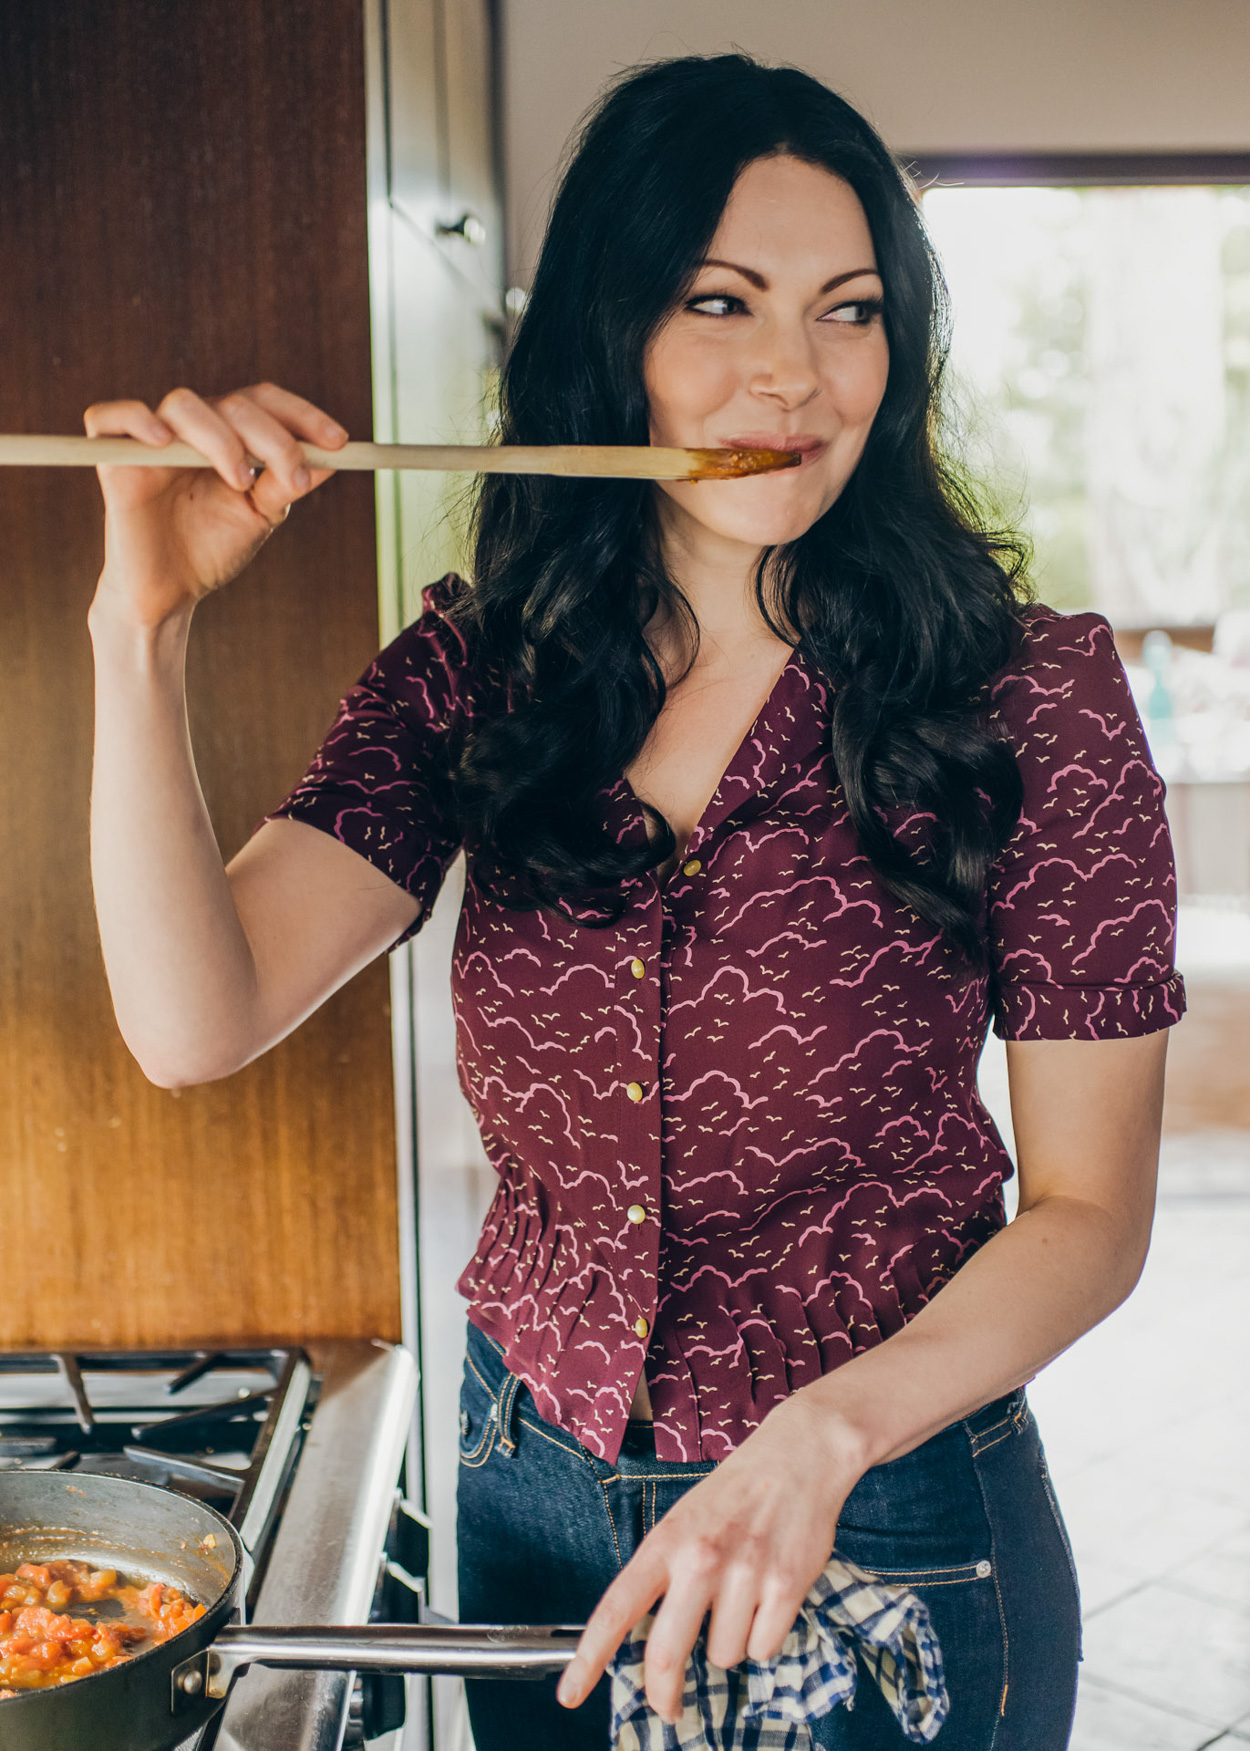 Los Angeles Food photographer - The Stash Plan  Cookbook Laura Prepon  in kitchen  by Ray Kachatorian-020